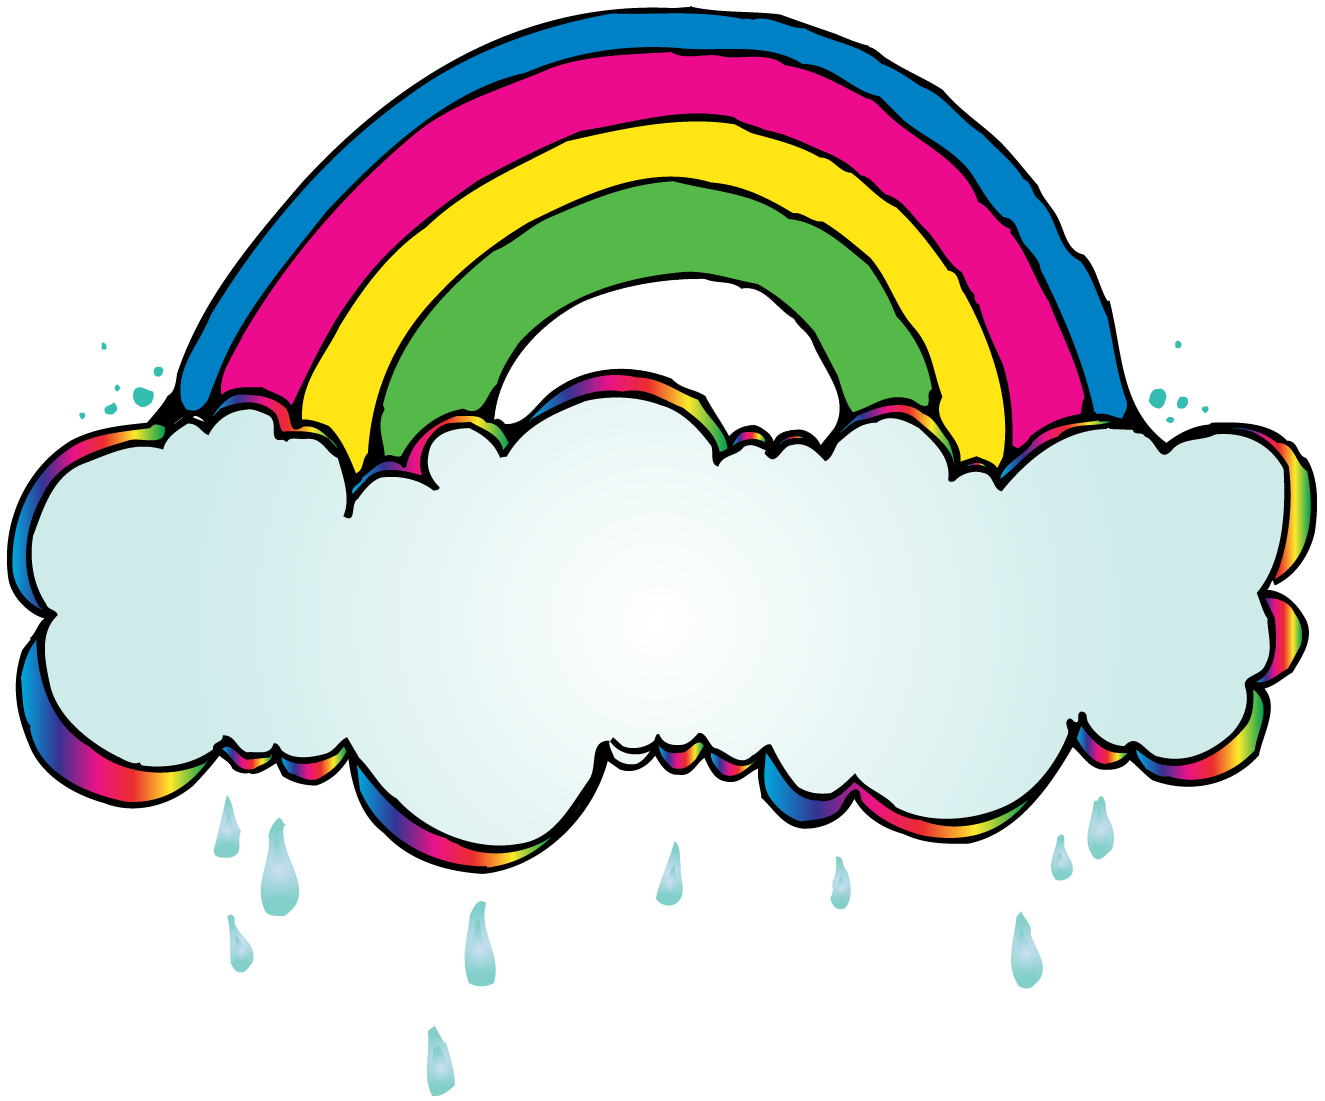 Rainbow pencil and in. Clouds clipart doodle